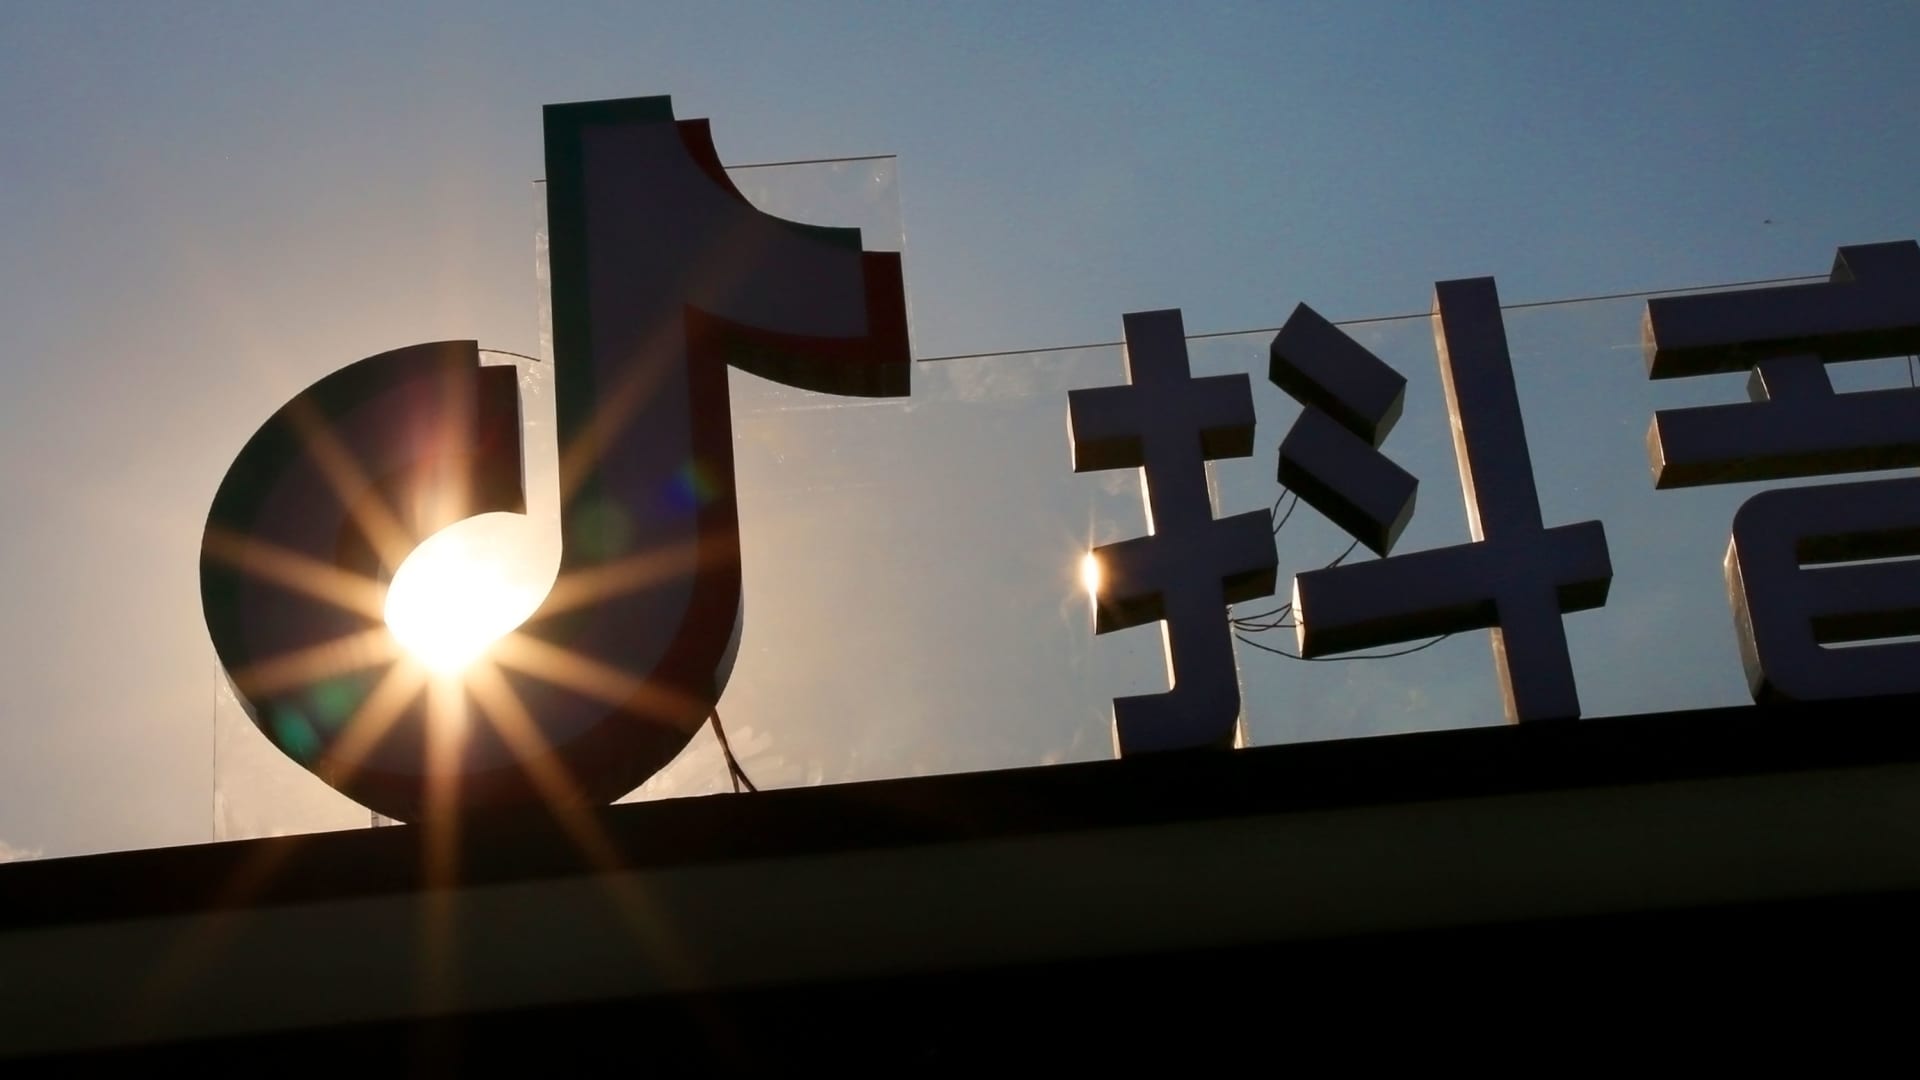 A symbol of TikTok (Douyin) is pictured at The Place shopping mall at dusk on August 22, 2020 in Beijing, China.